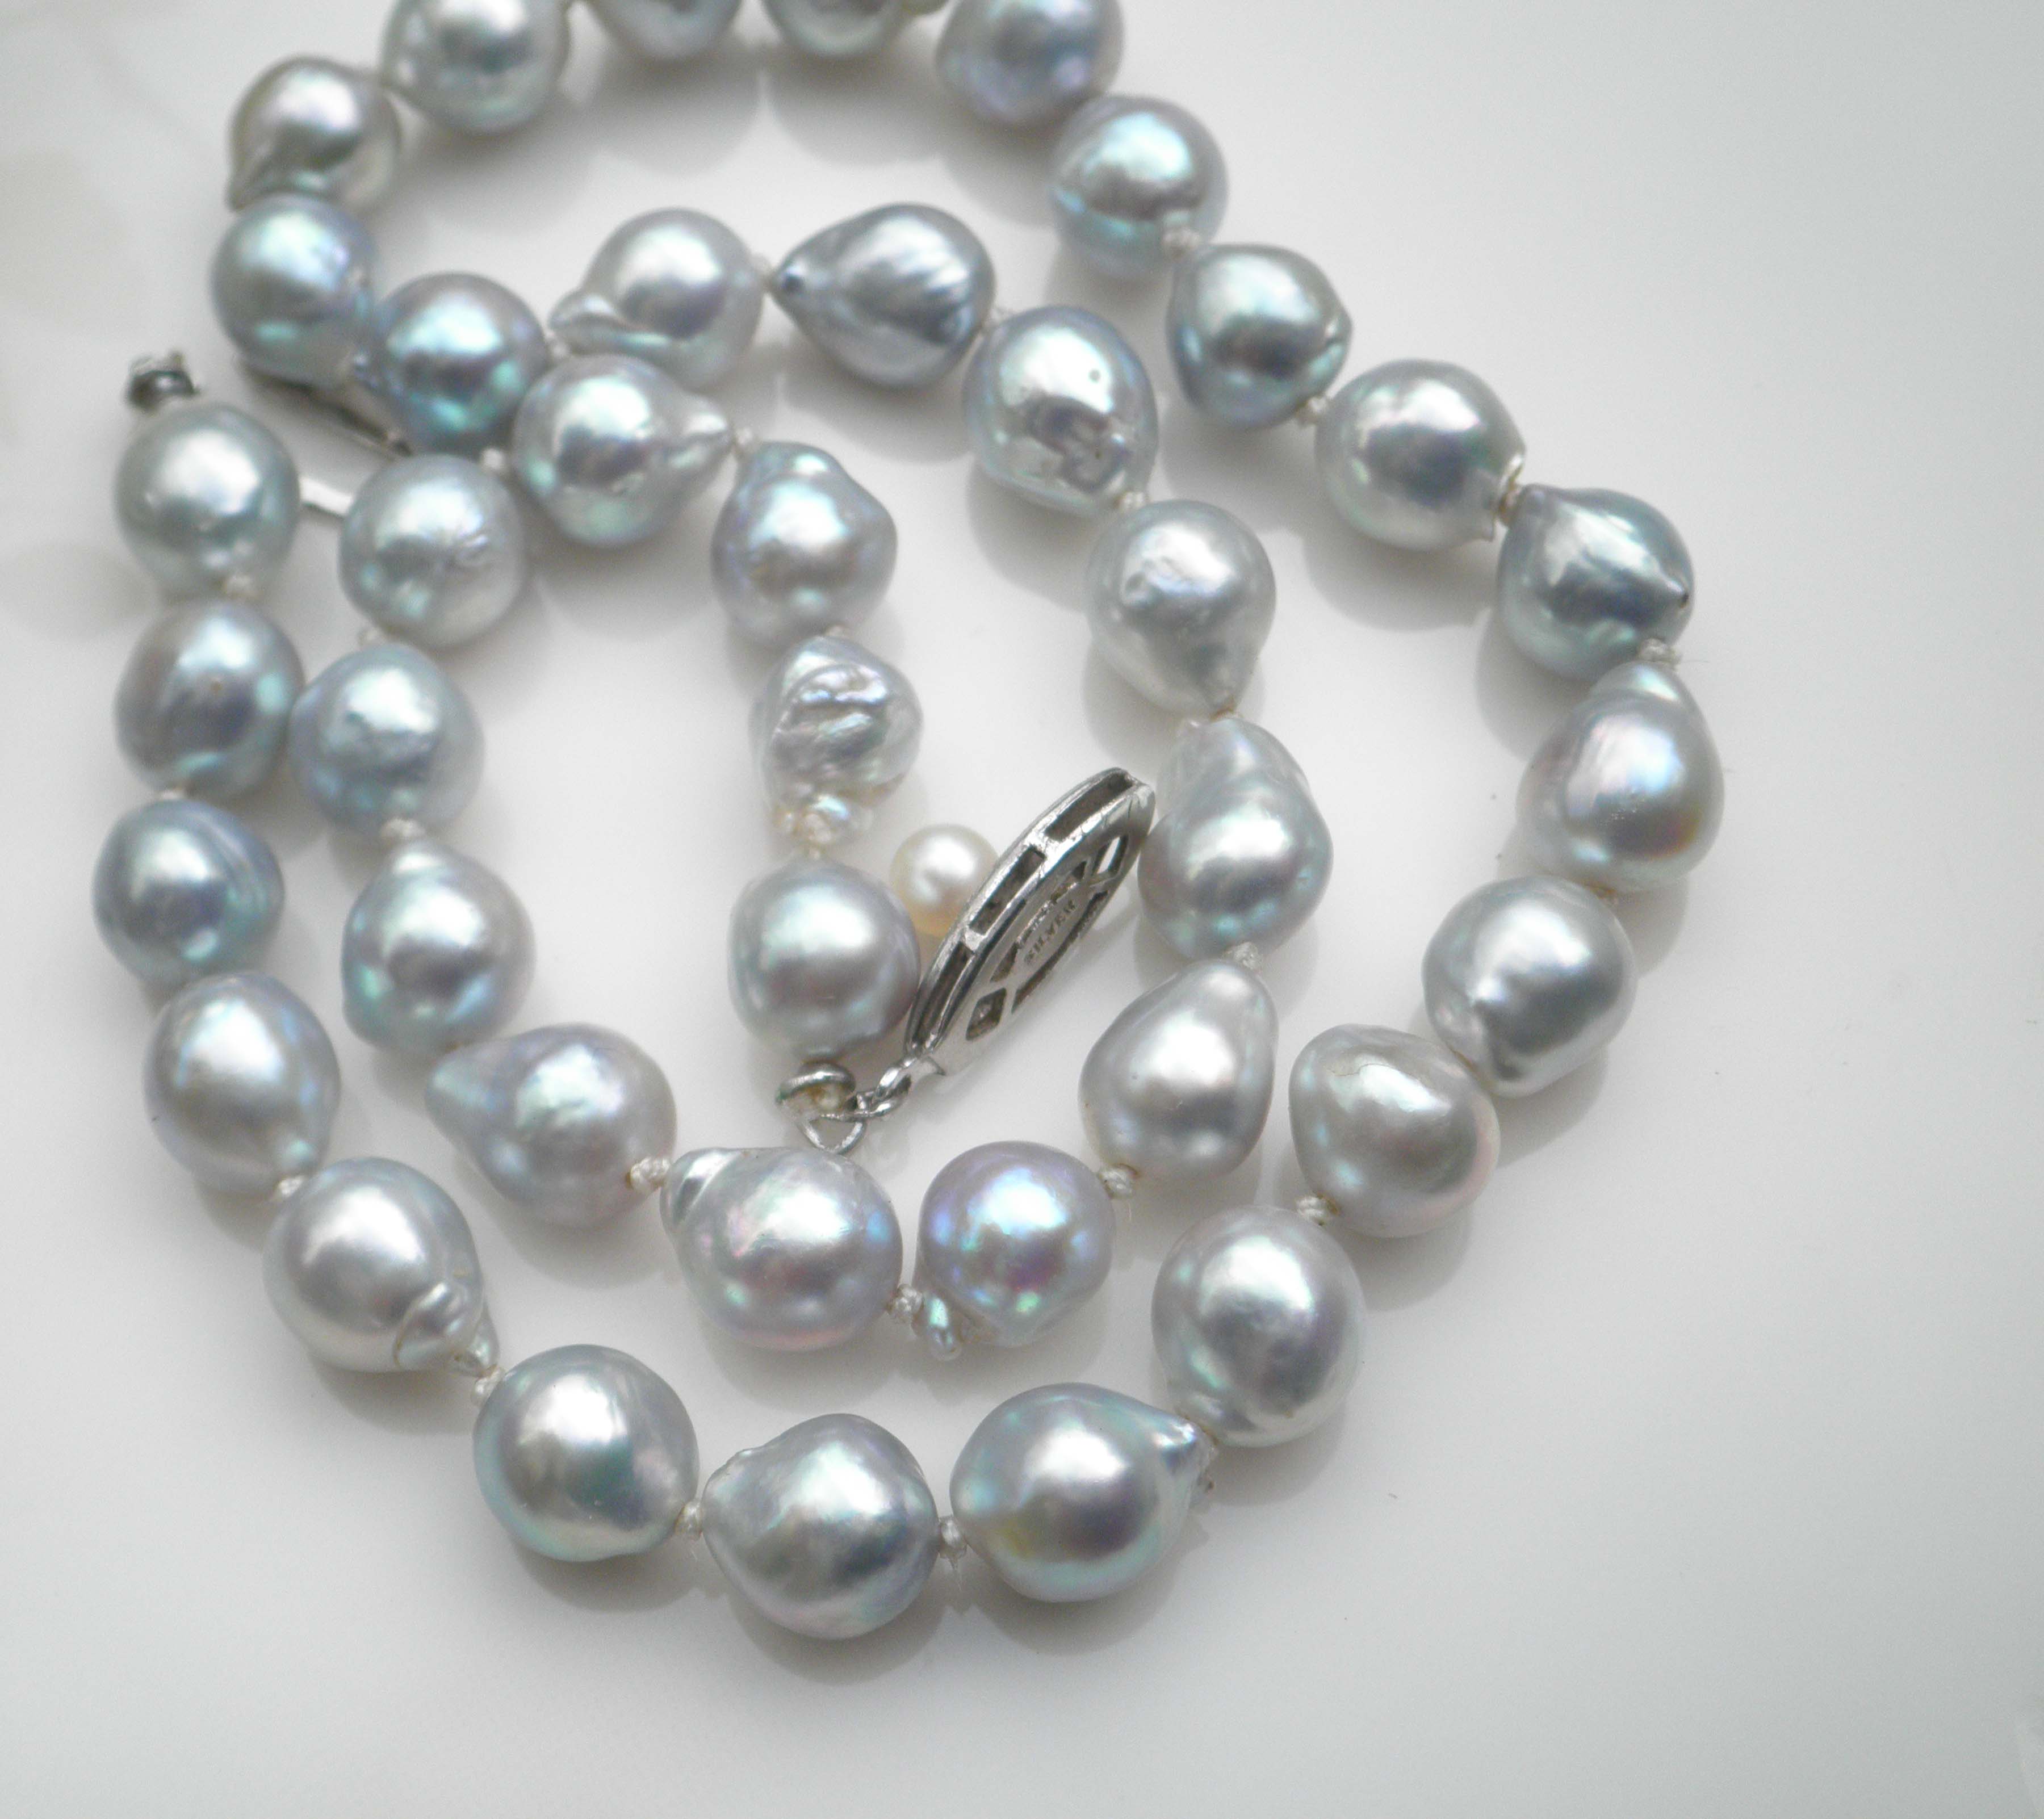 Are These Akoya Pearls?